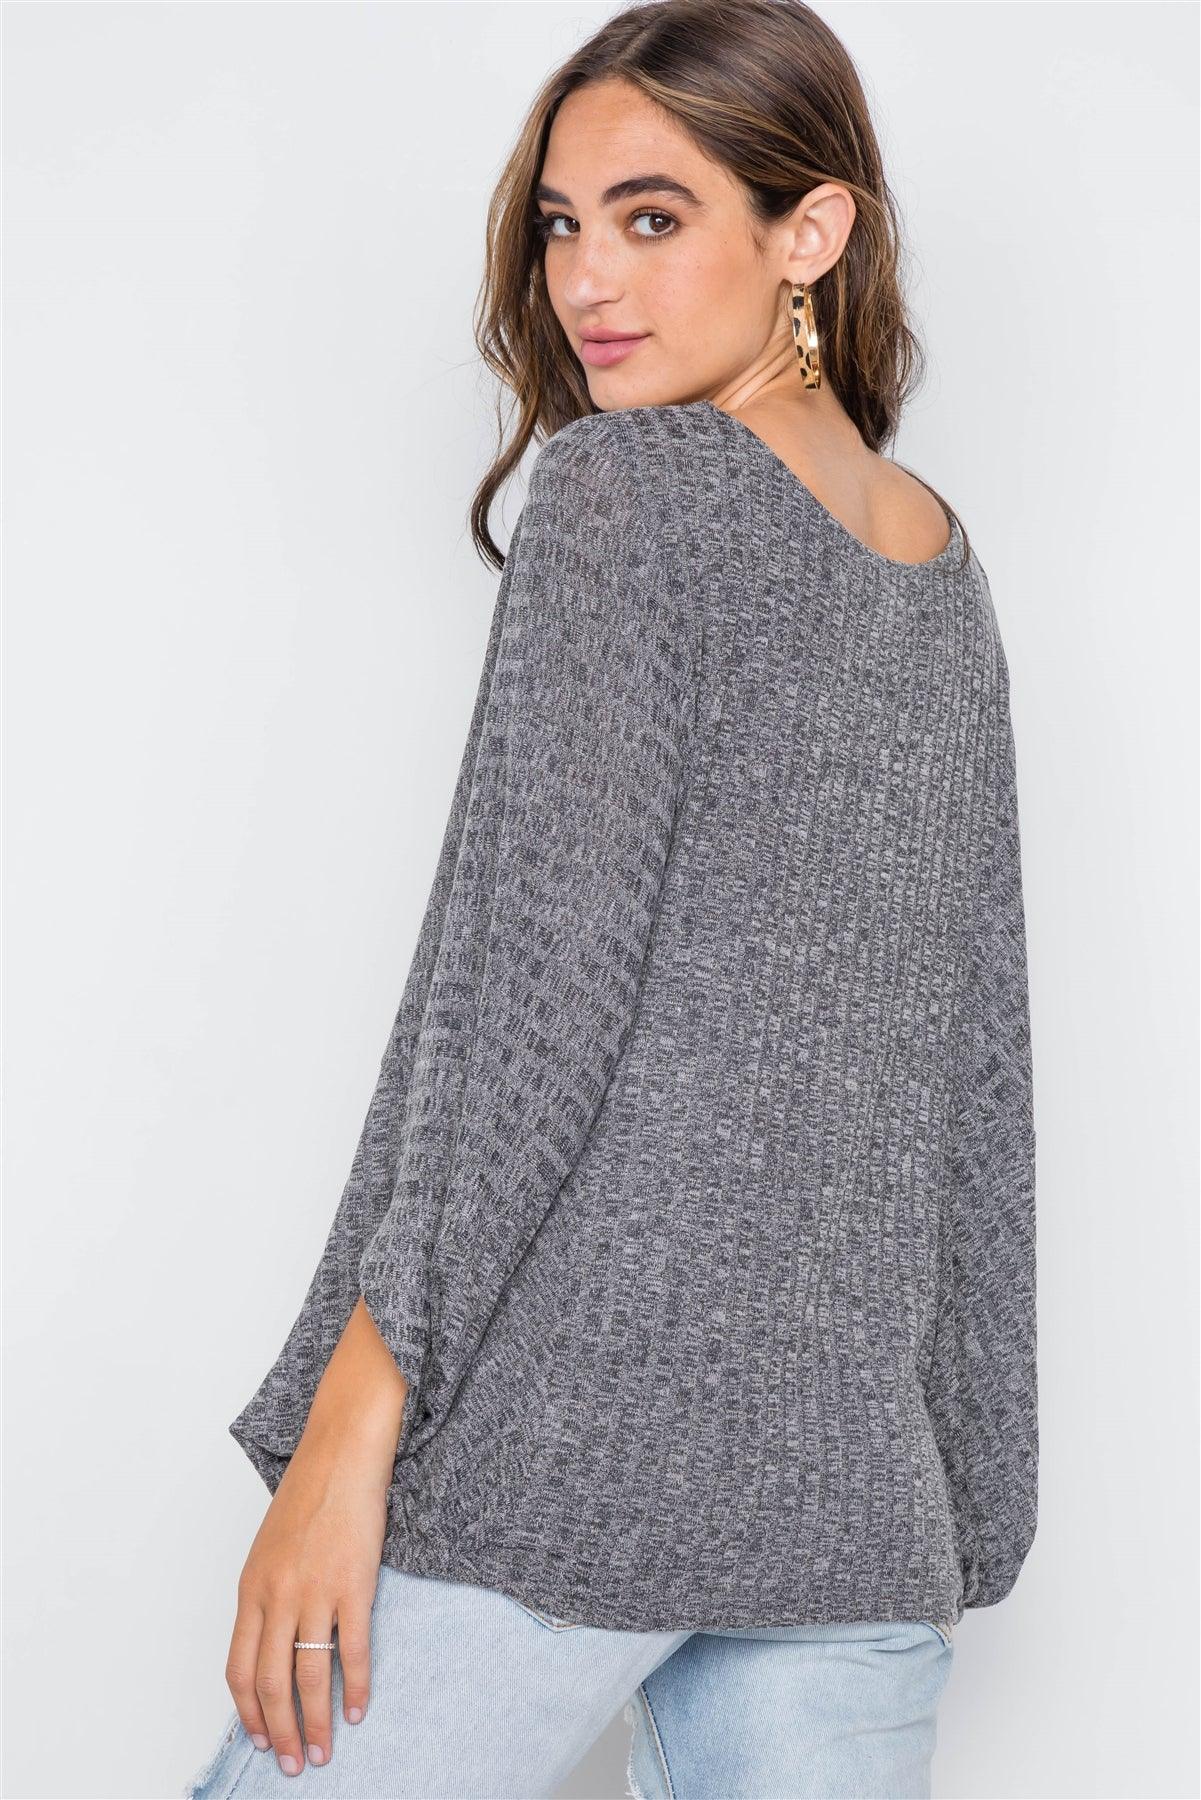 Charcoal Ribbed Loose Fit Knit Top /4-2